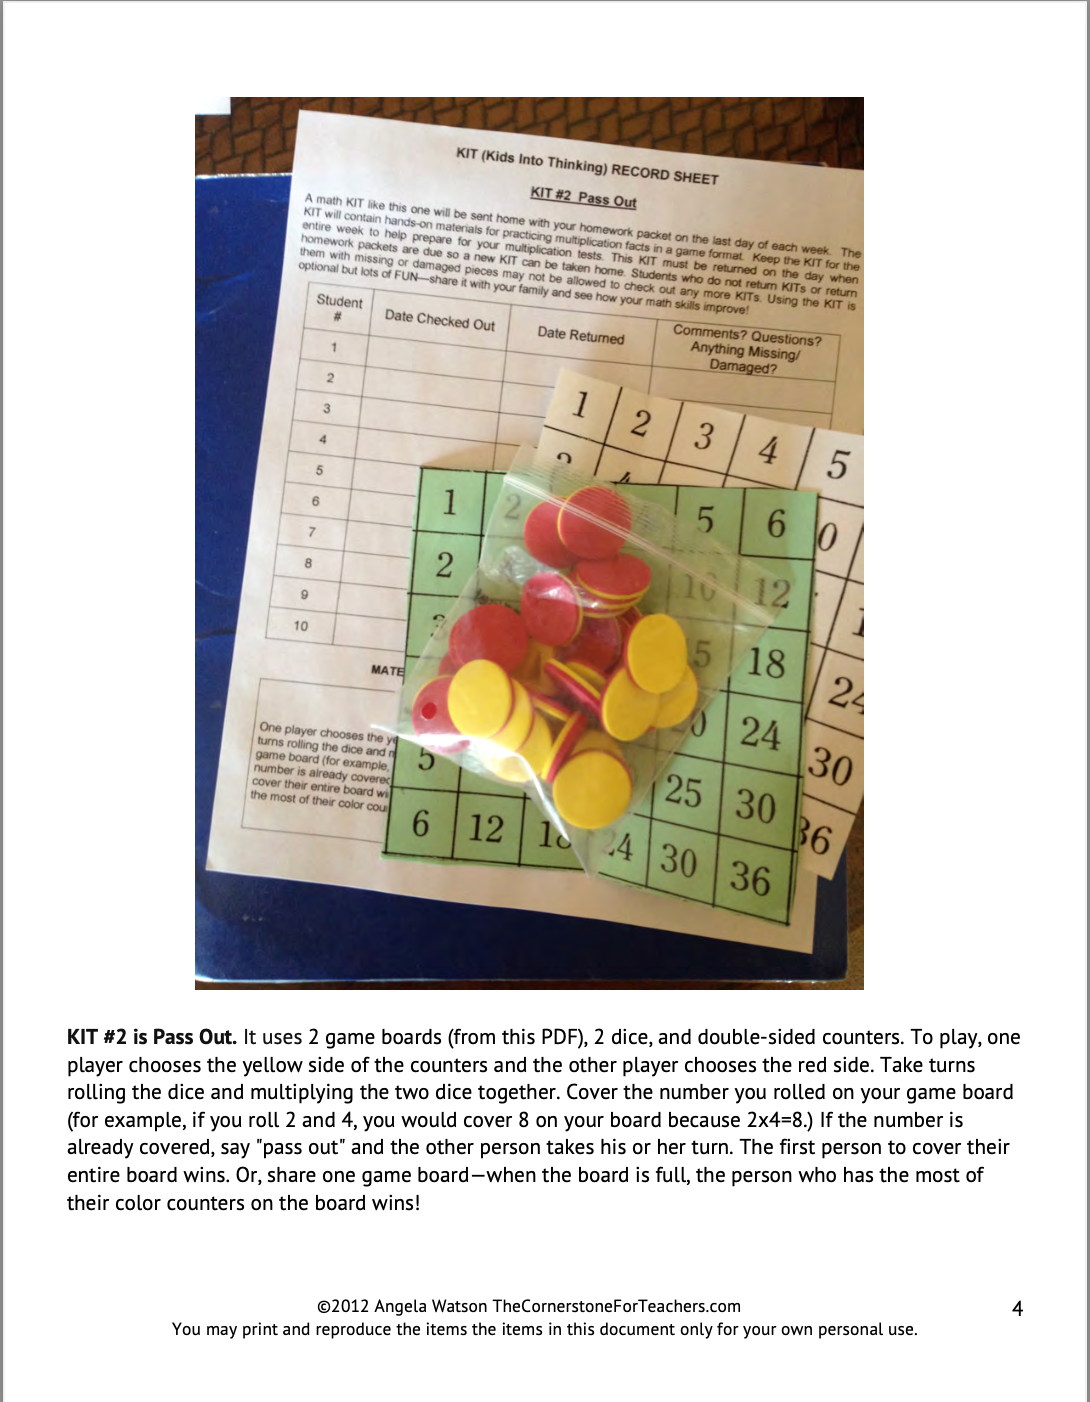 Multiplication KITs: Editable math games for school or home